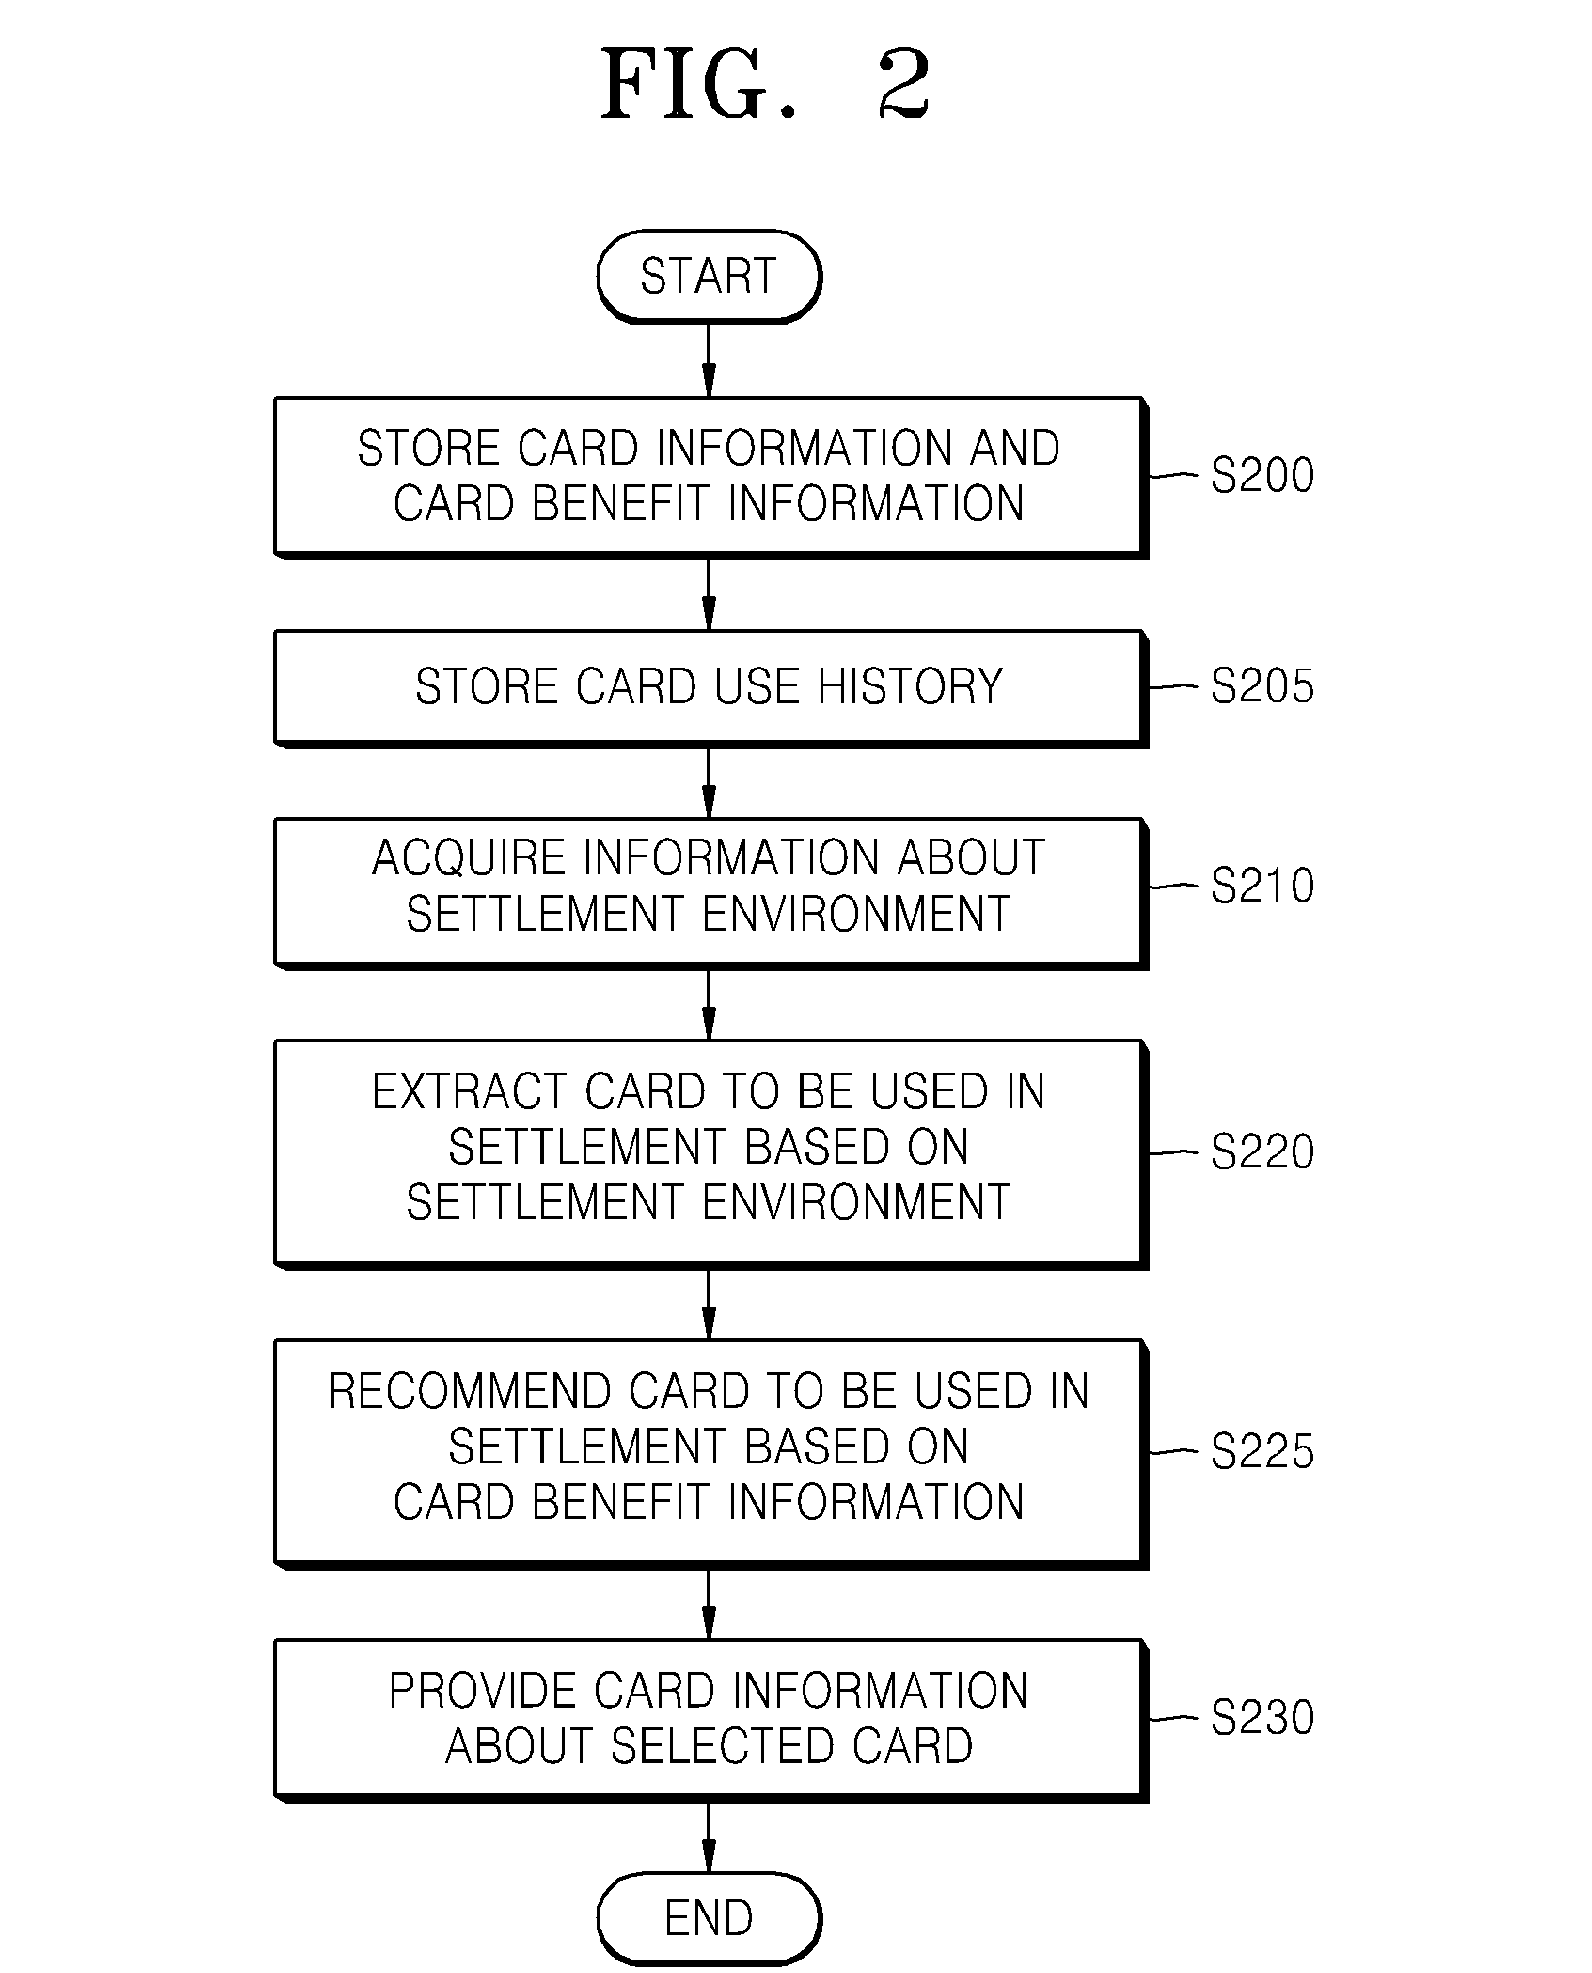 Method and apparatus for determining item based on interaction environment